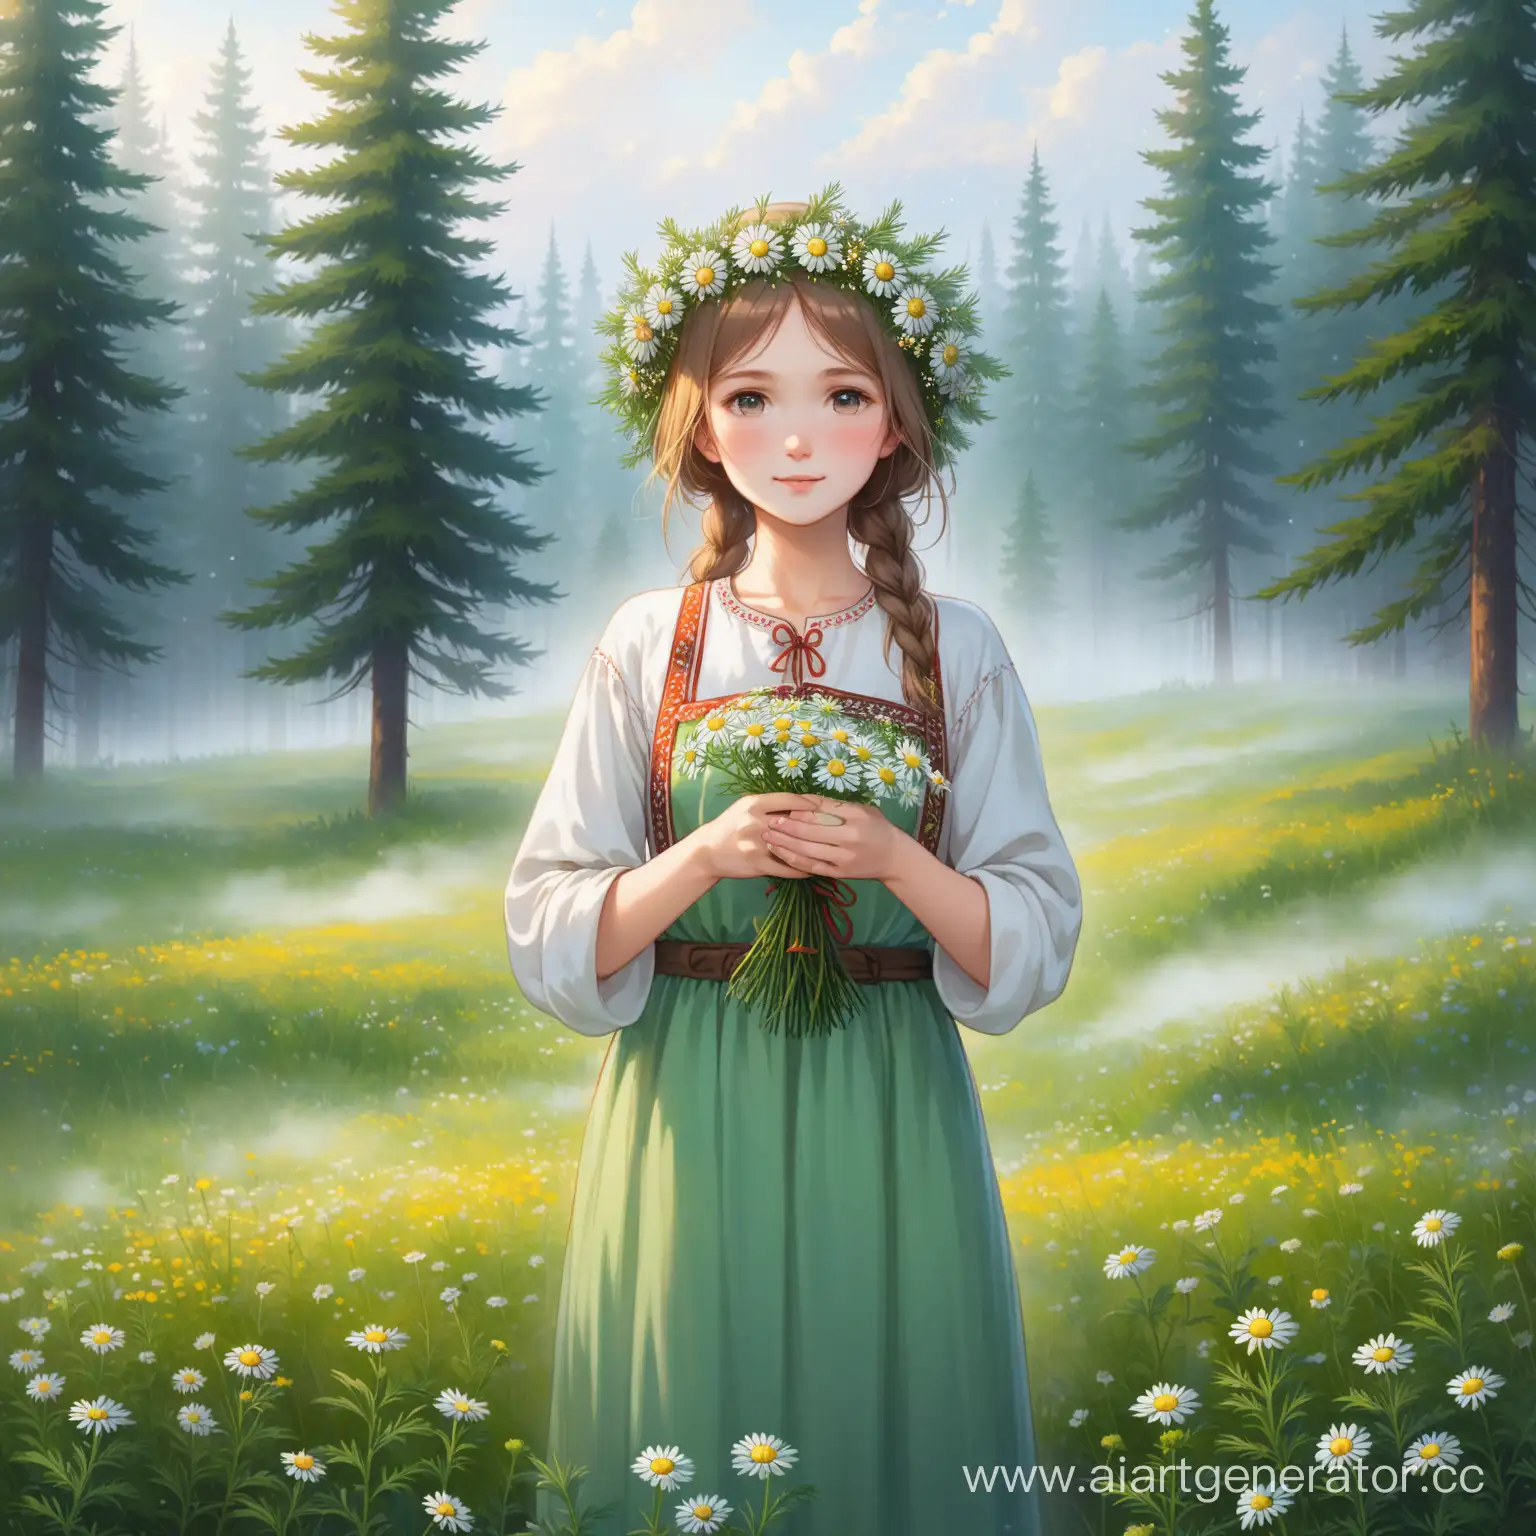 Russian-Peasant-Girl-in-National-Dress-with-Camomile-in-Misty-Forest-Meadow